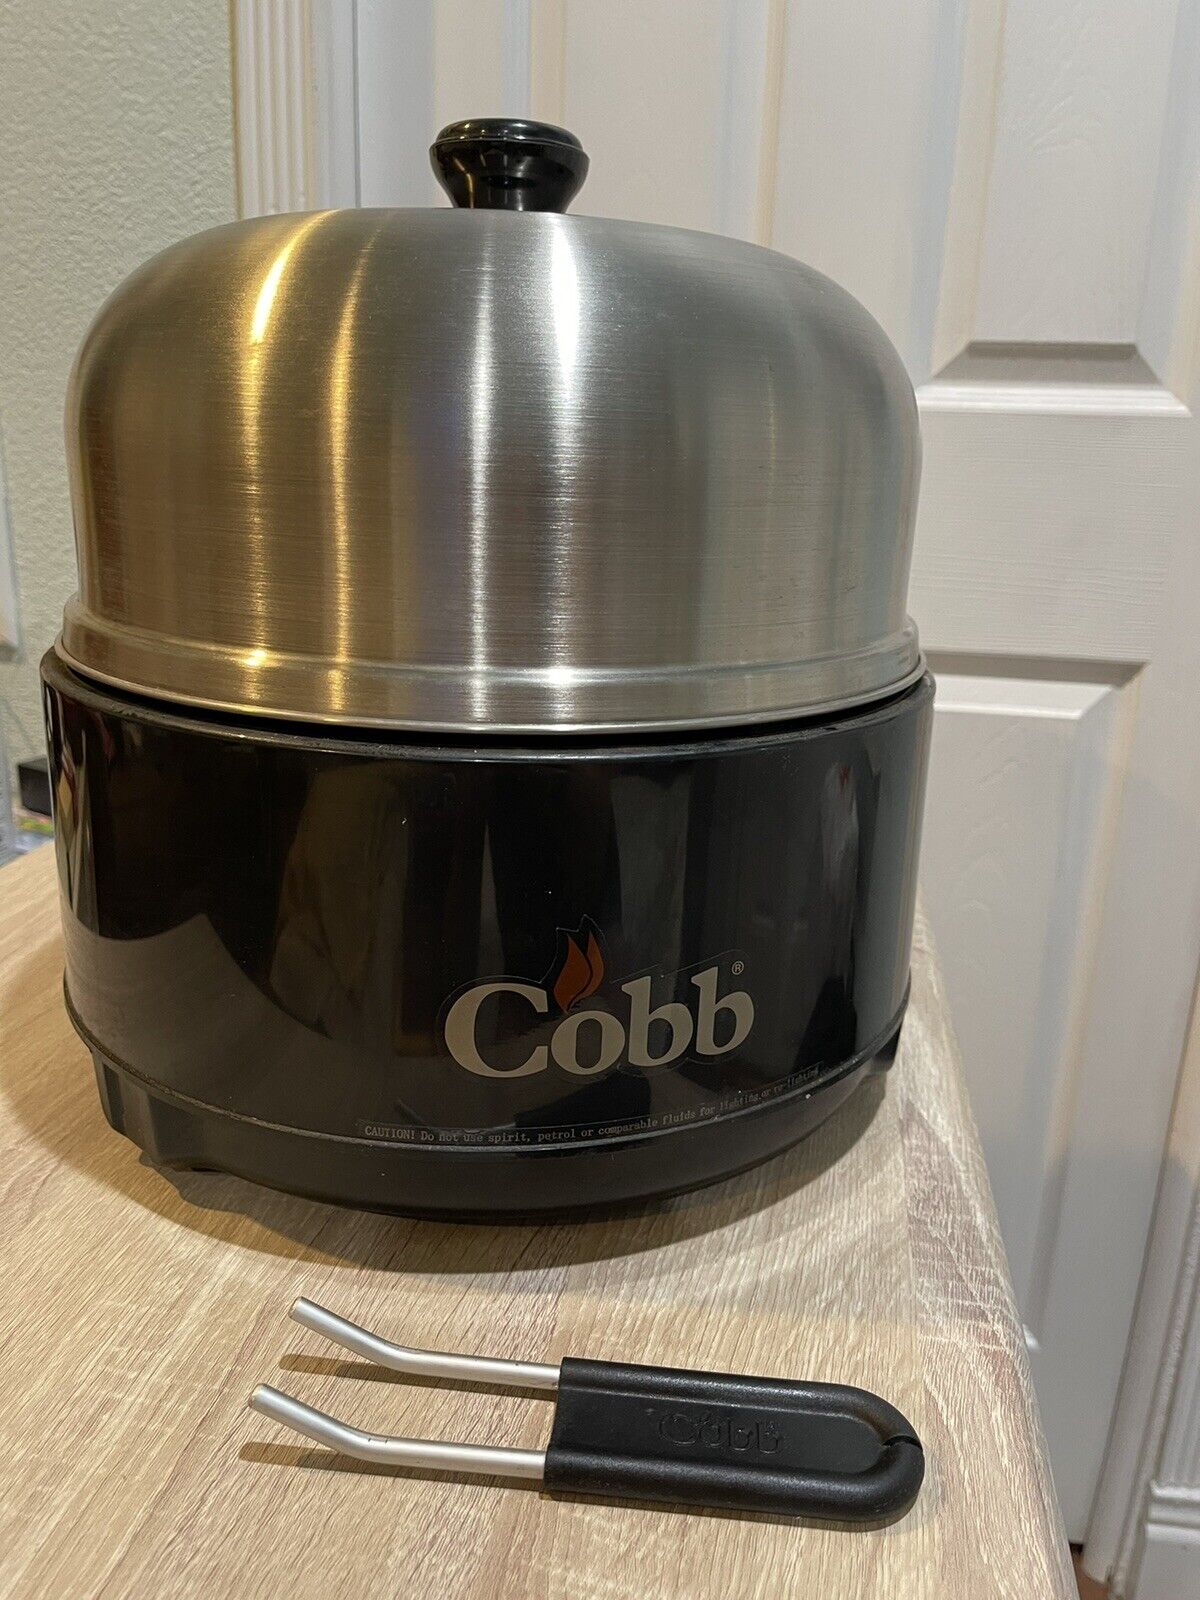 Cobb Premiere Portable Stainless Steel Grill/Smoker Camping BBQ #6009688700381